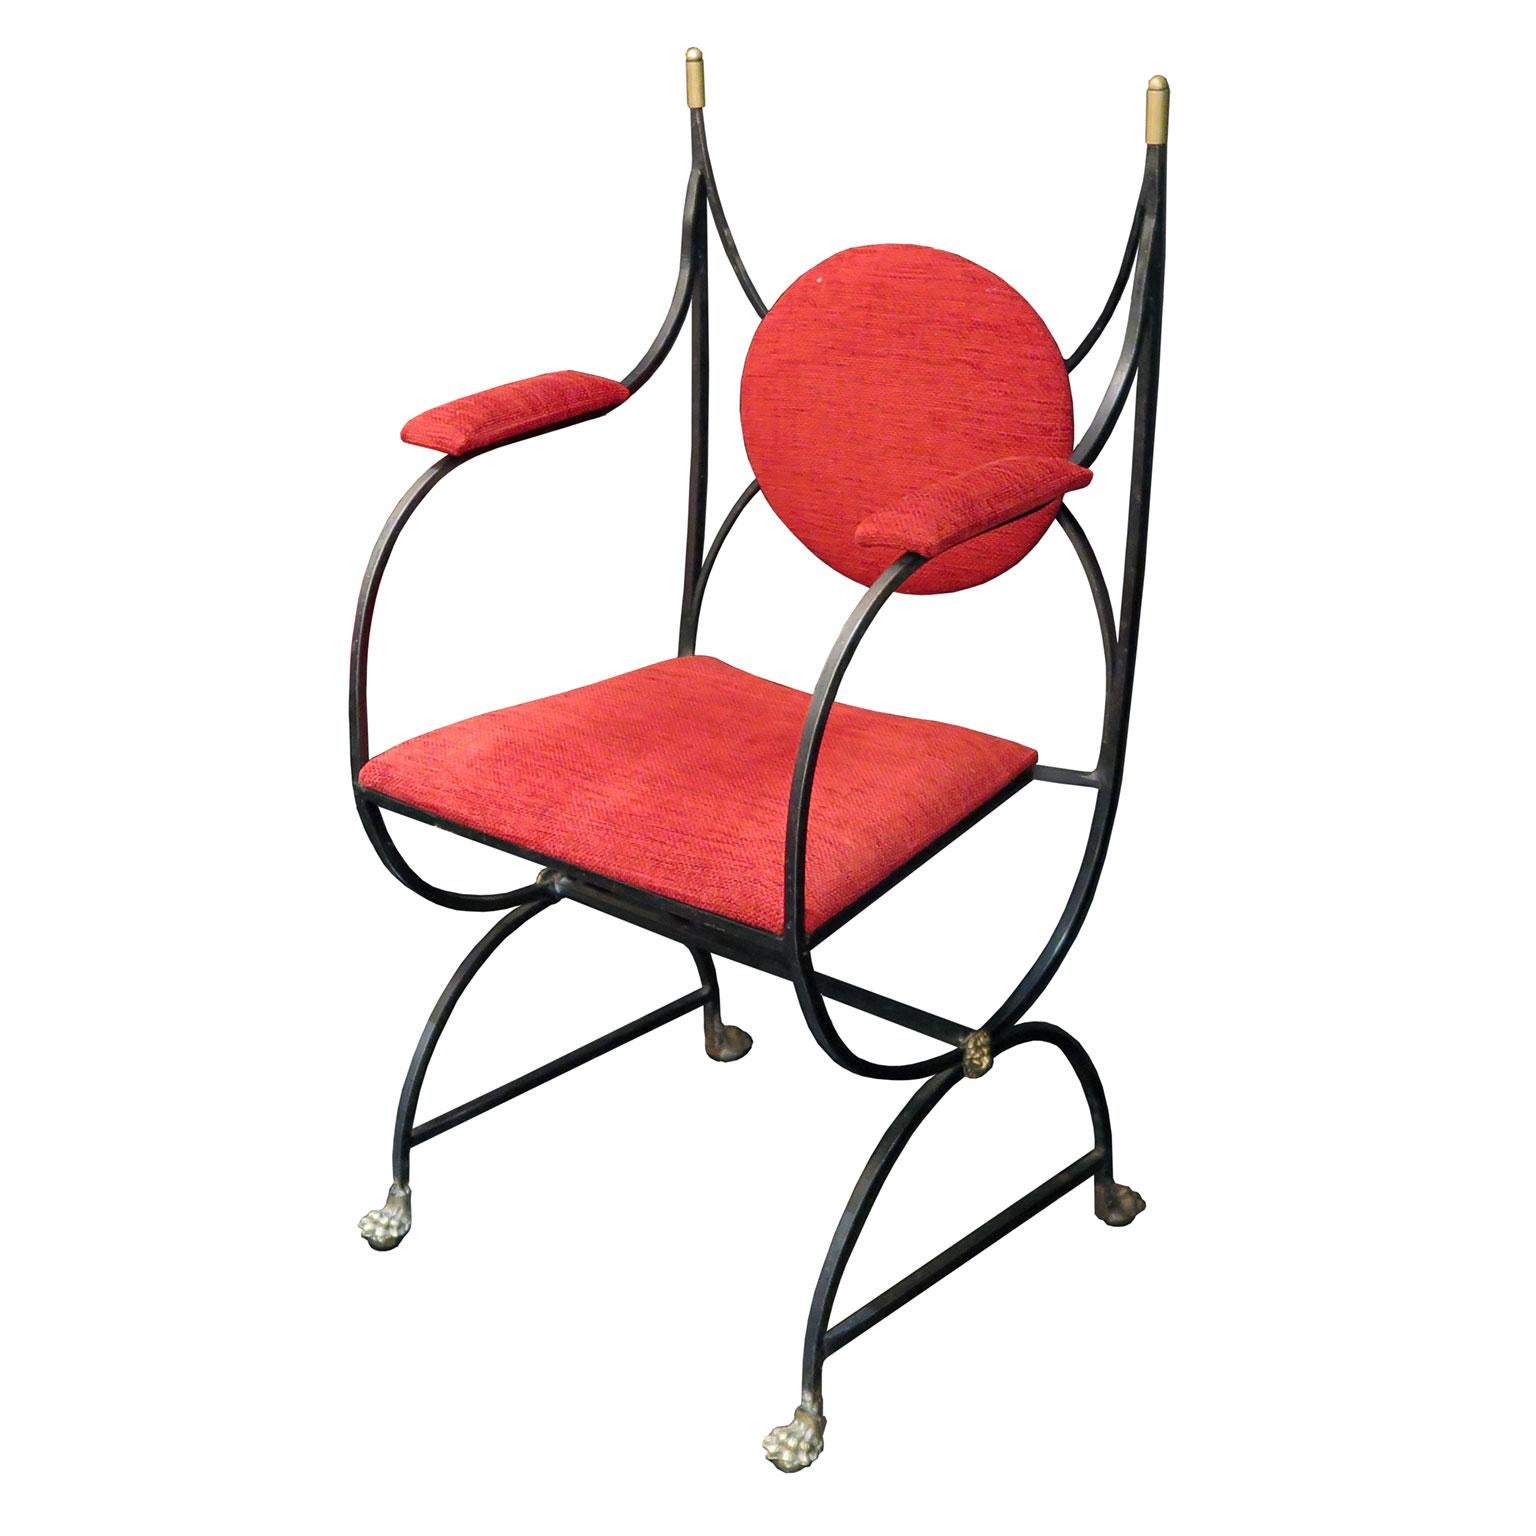 Set of six midcentury chairs in black wrought iron with brass claw feet and lion heads on legs. Brass finials decorate the top frame of the chairs. Upholstery consists of rounded backs and square seat cushions in a red fabric. There are five side